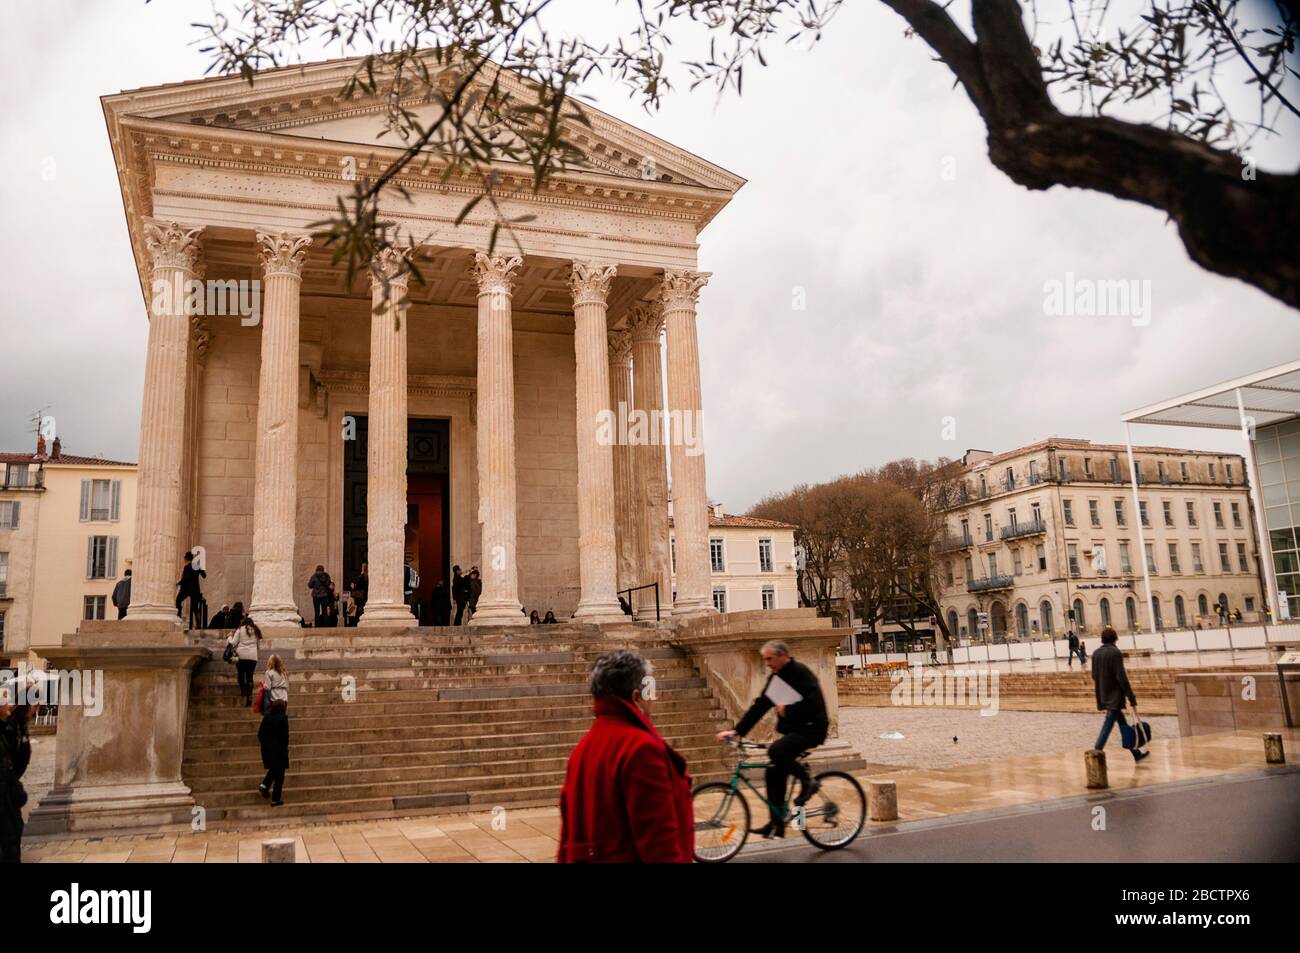 Maison Carrée Tuscan style Roman temple in Nîmes, France. Stock Photo